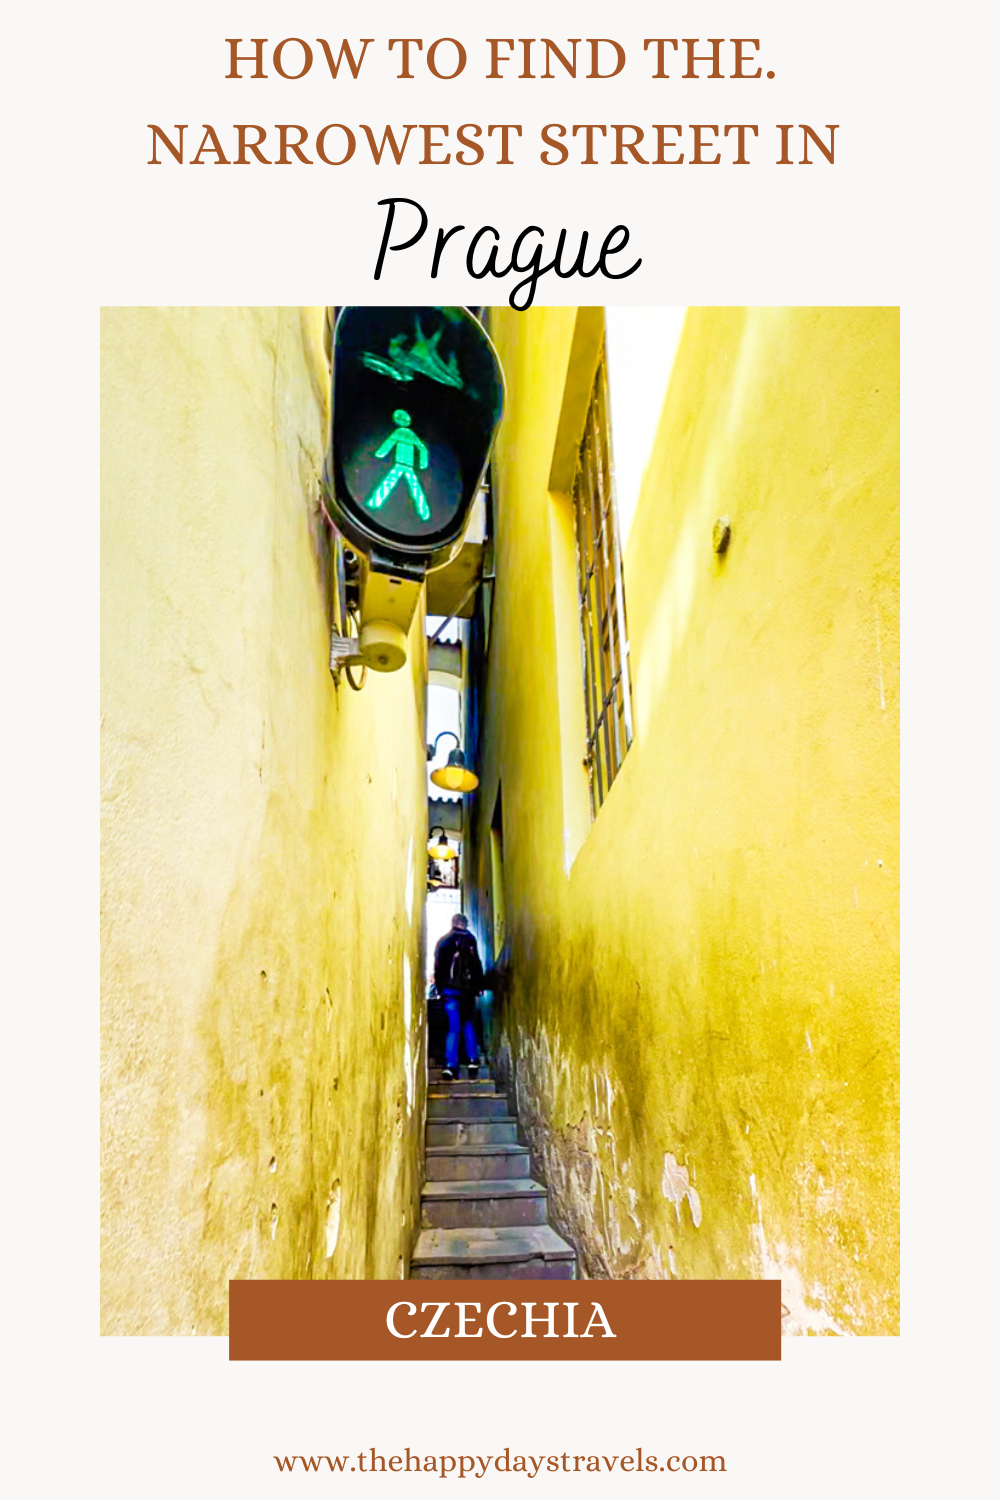 Pin image text reads 'how to find the narrowest street in Prague, Czechia' with white border and centre picture shows the narrow street between yellow walls and a green man on the traffic light in top left corner